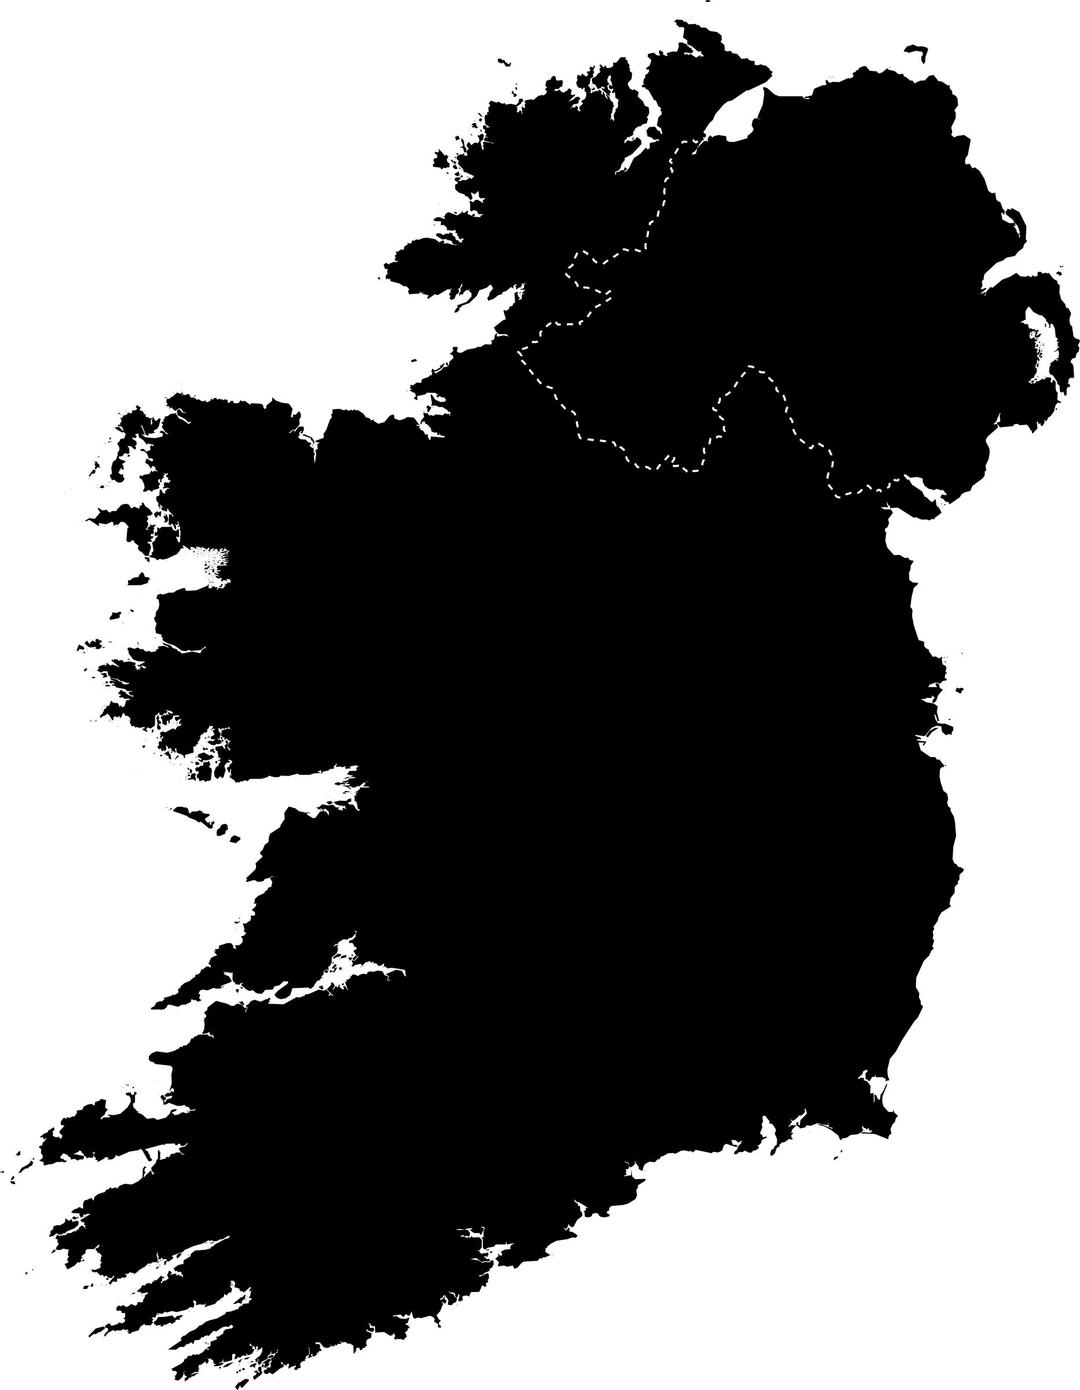 Ireland silhouette 3 png transparent